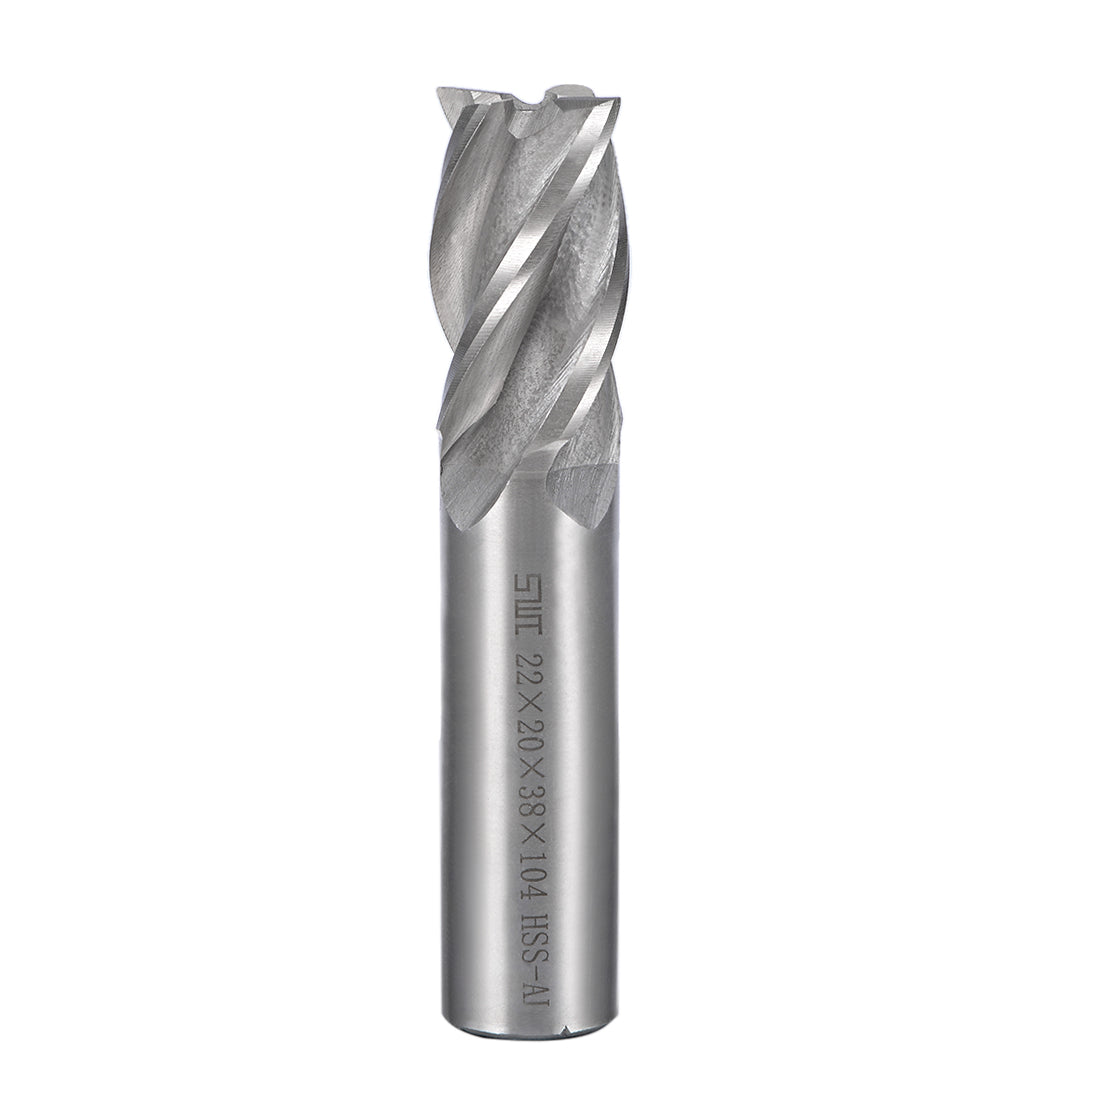 uxcell Uxcell HSS-AL 4 Flute Straight End Mill Cutter CNC Router Bits